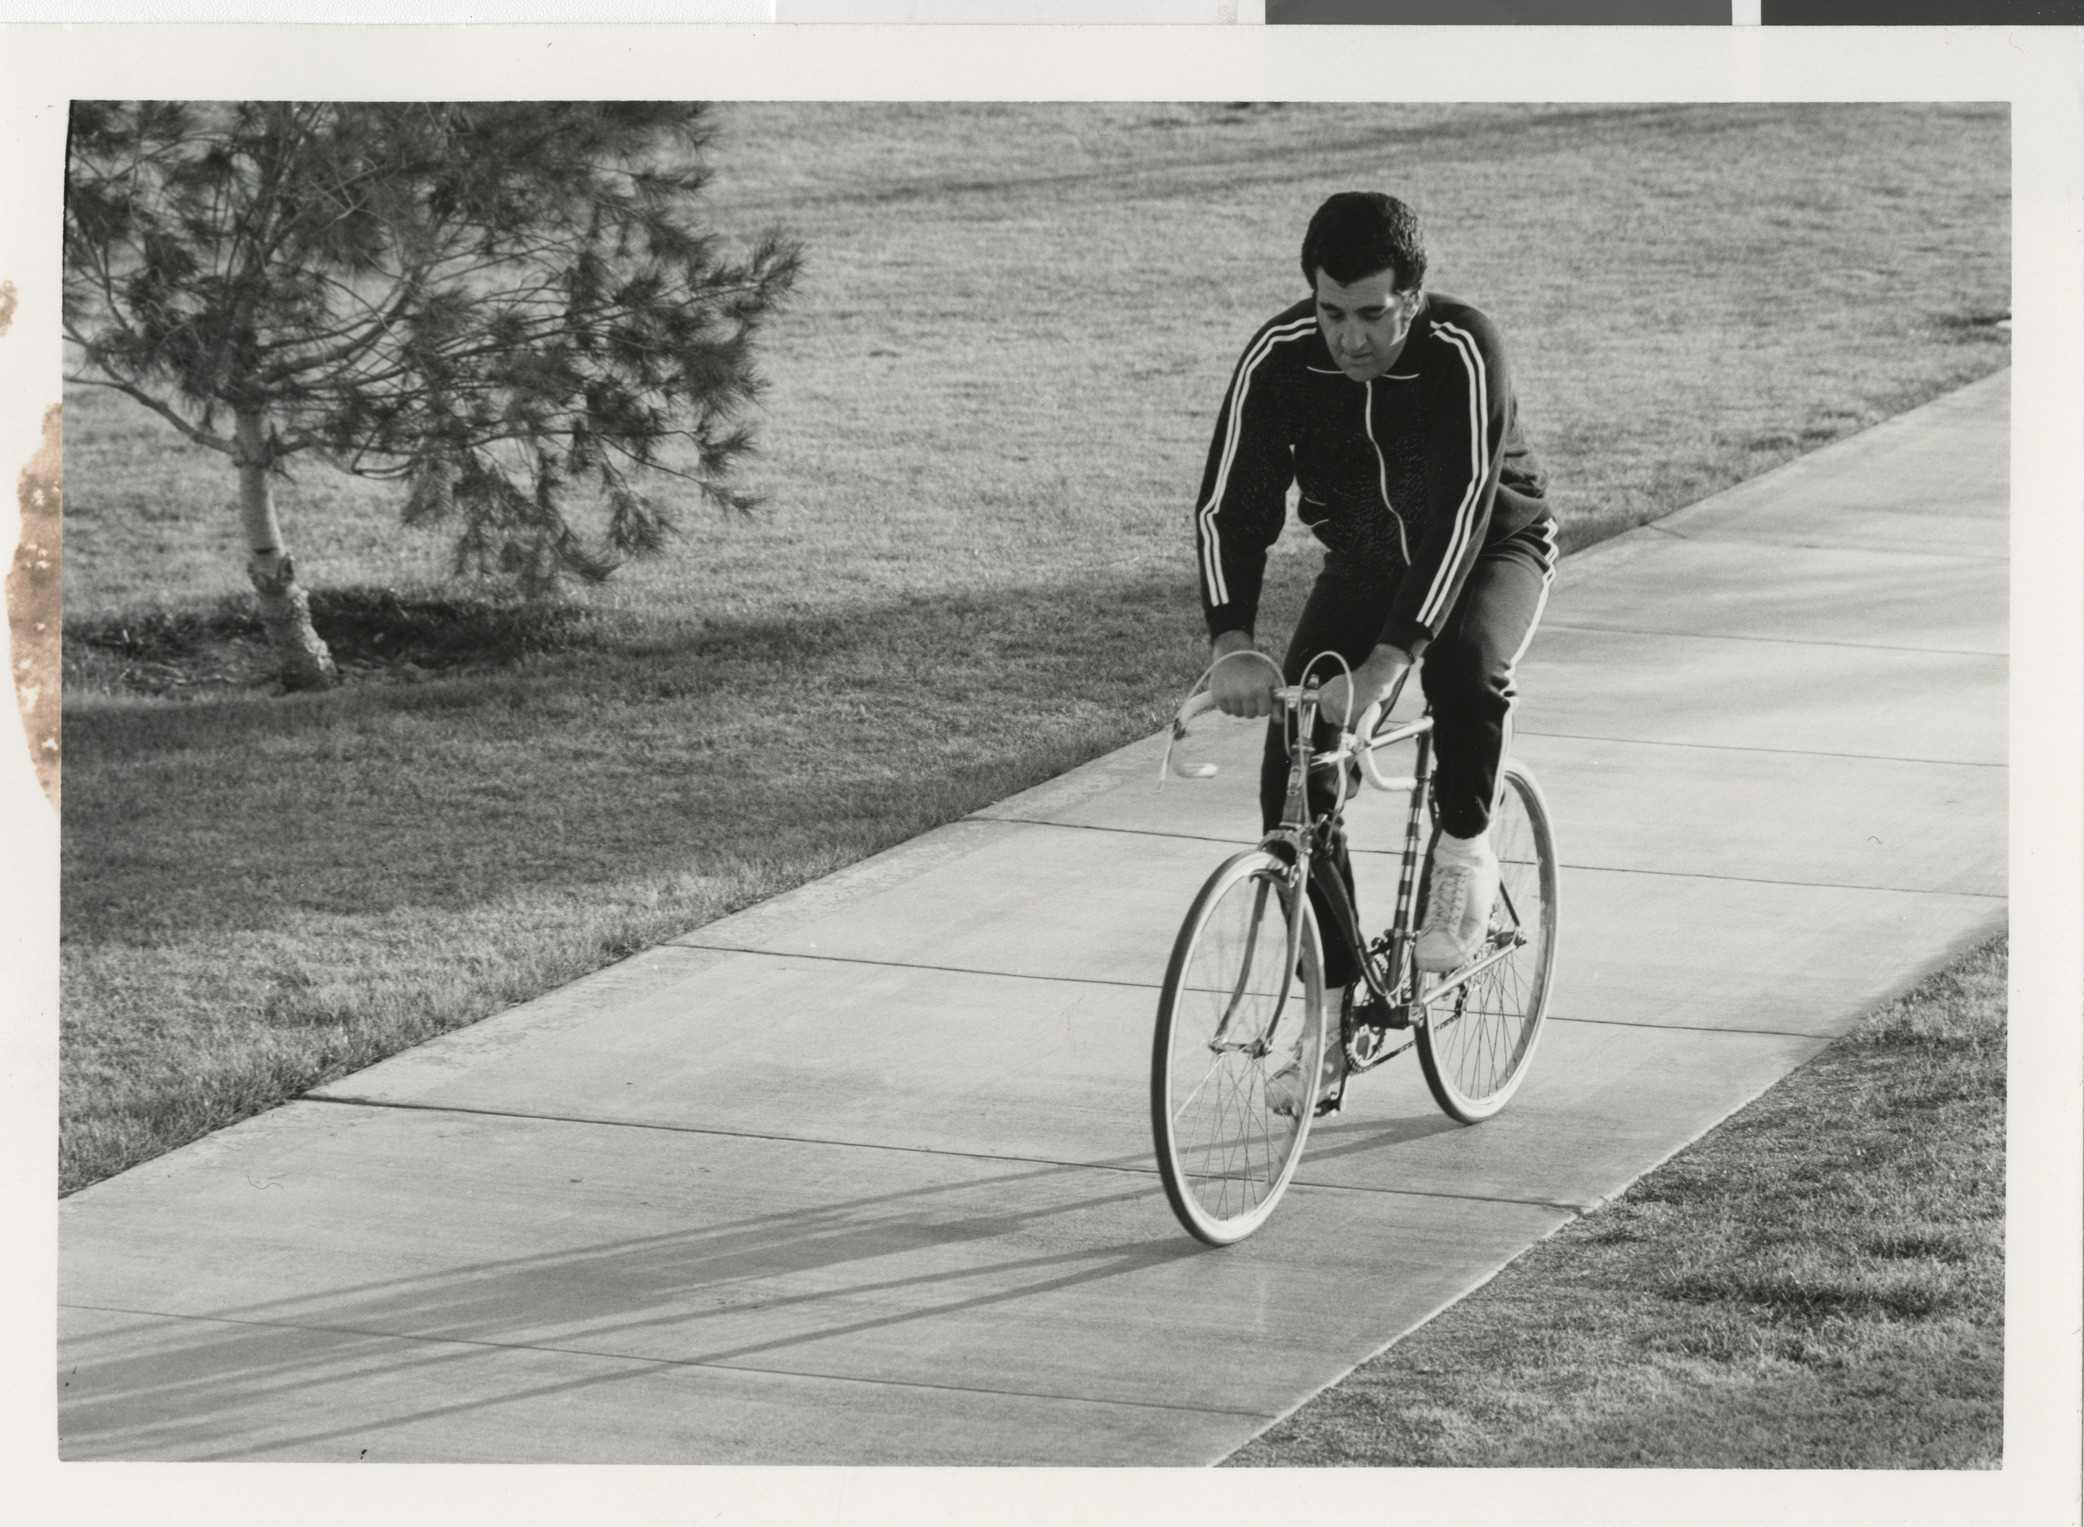 Photograph of Ron Lurie riding a bicycle